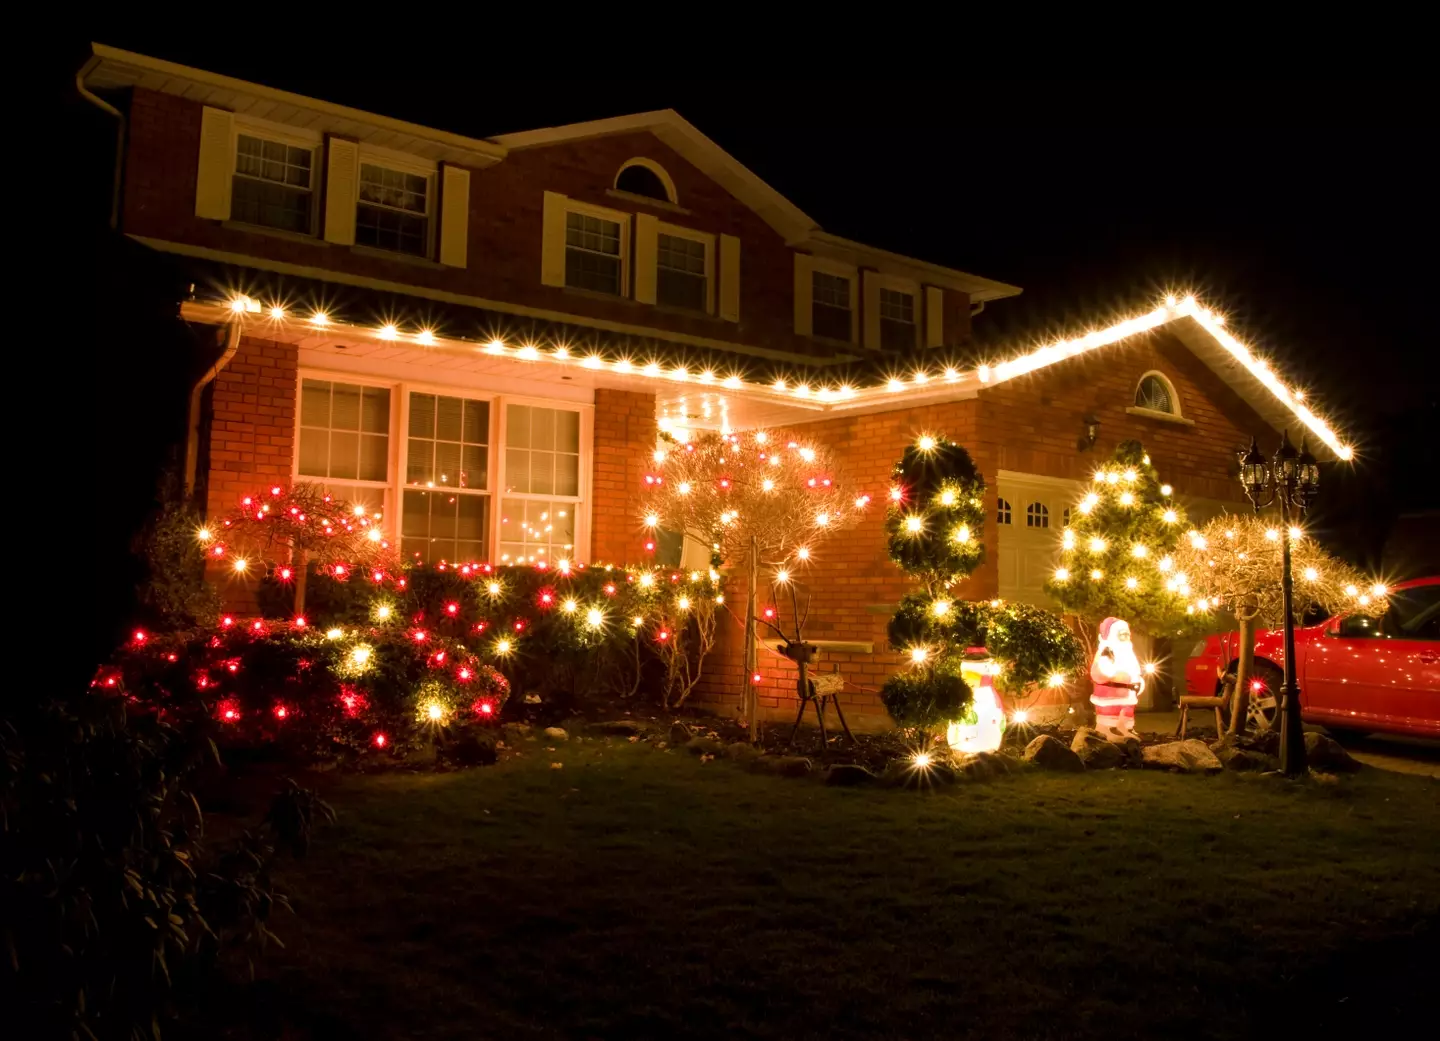 Exterior lights can turn off robbers from targeting your property.